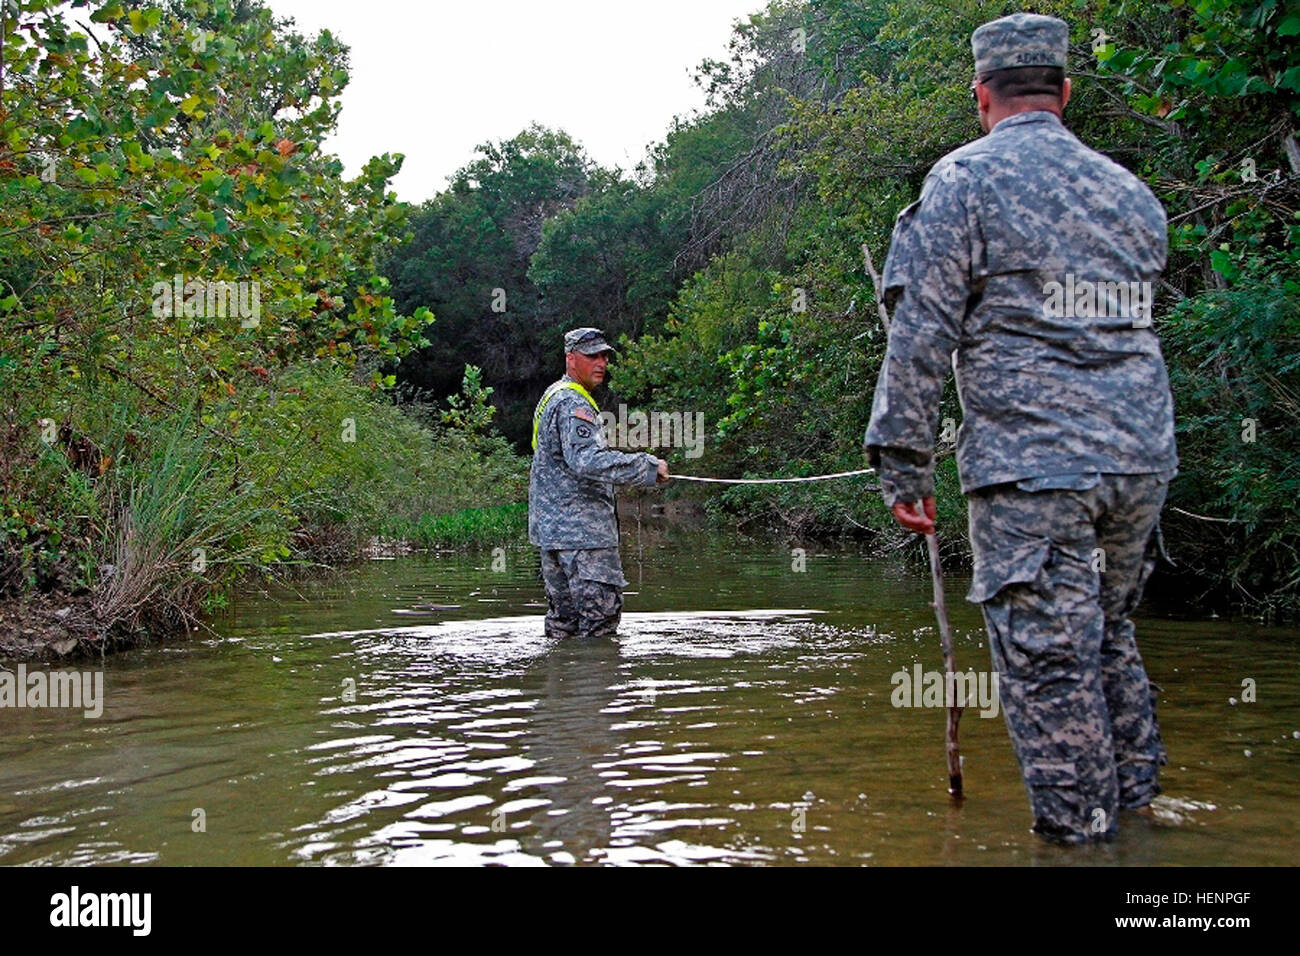 Staff Sgt. Robert Owen (left) and Spc. Zachary Adkins, both combat engineers assigned to Headquarters and Headquarters Company 'Hammer,' 1st Brigade Combat Team 'Ironhorse,' 1st Cavalry Division, measure distance between two points in a stream to determine its velocity during First Team Training Aug. 21 at Fort Hood, Texas. The 1st Cavalry Division has emphasized the importance of continued professional development every Thursday during First Team Training. (U.S. Army photo by Spc. Paige Behringer, 1BCT PAO, 1st Cav. Div.) Soldiers train, build teams, conduct counseling for First Team Training Stock Photo